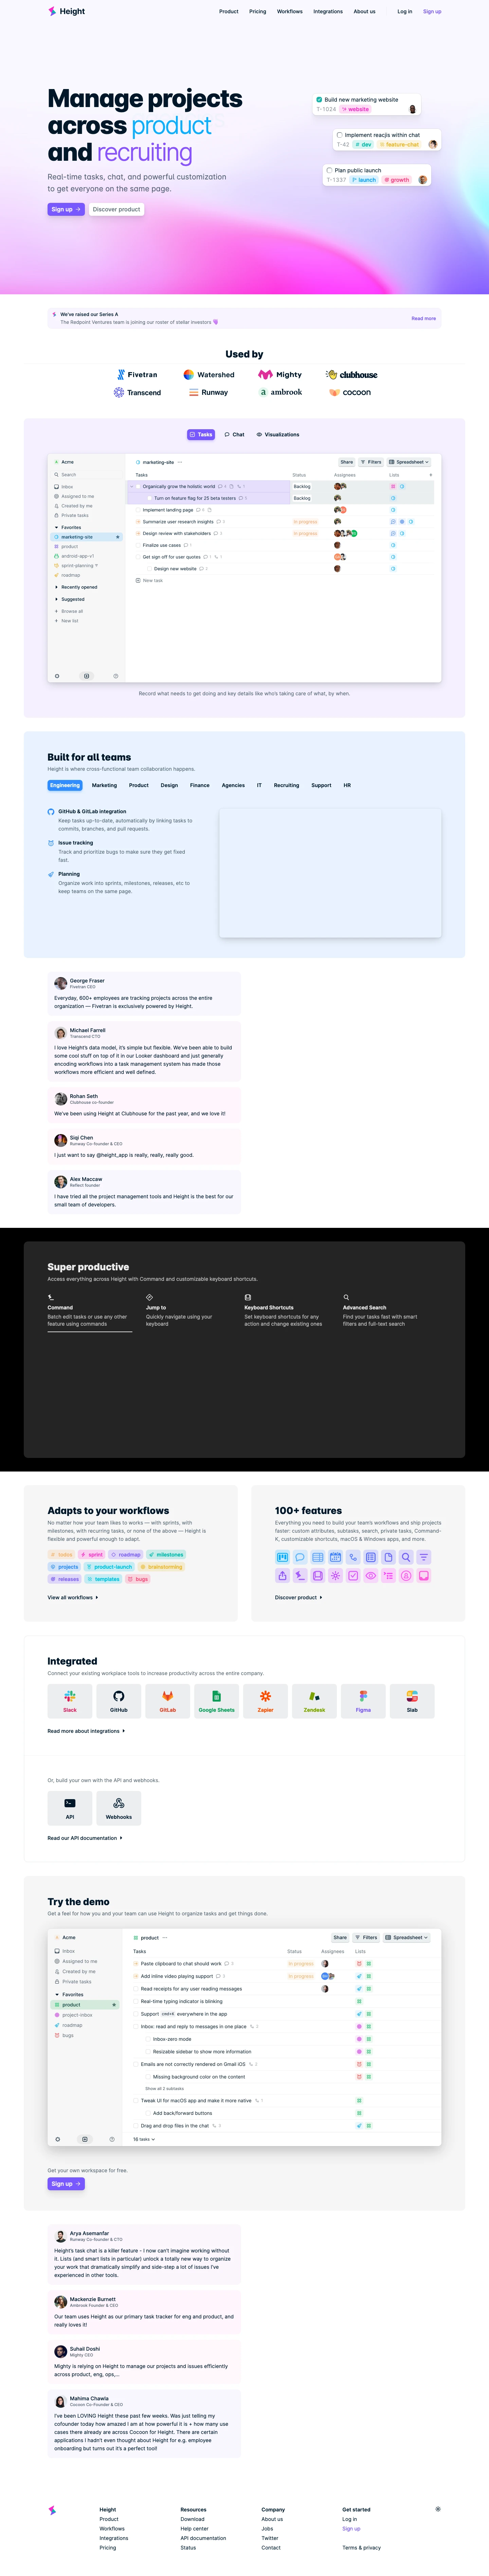 Height Landing Page Example: Manage projects across engineering, product, design, and other teams. Real-time tasks, chat, and powerful customization to get everyone on the same page.